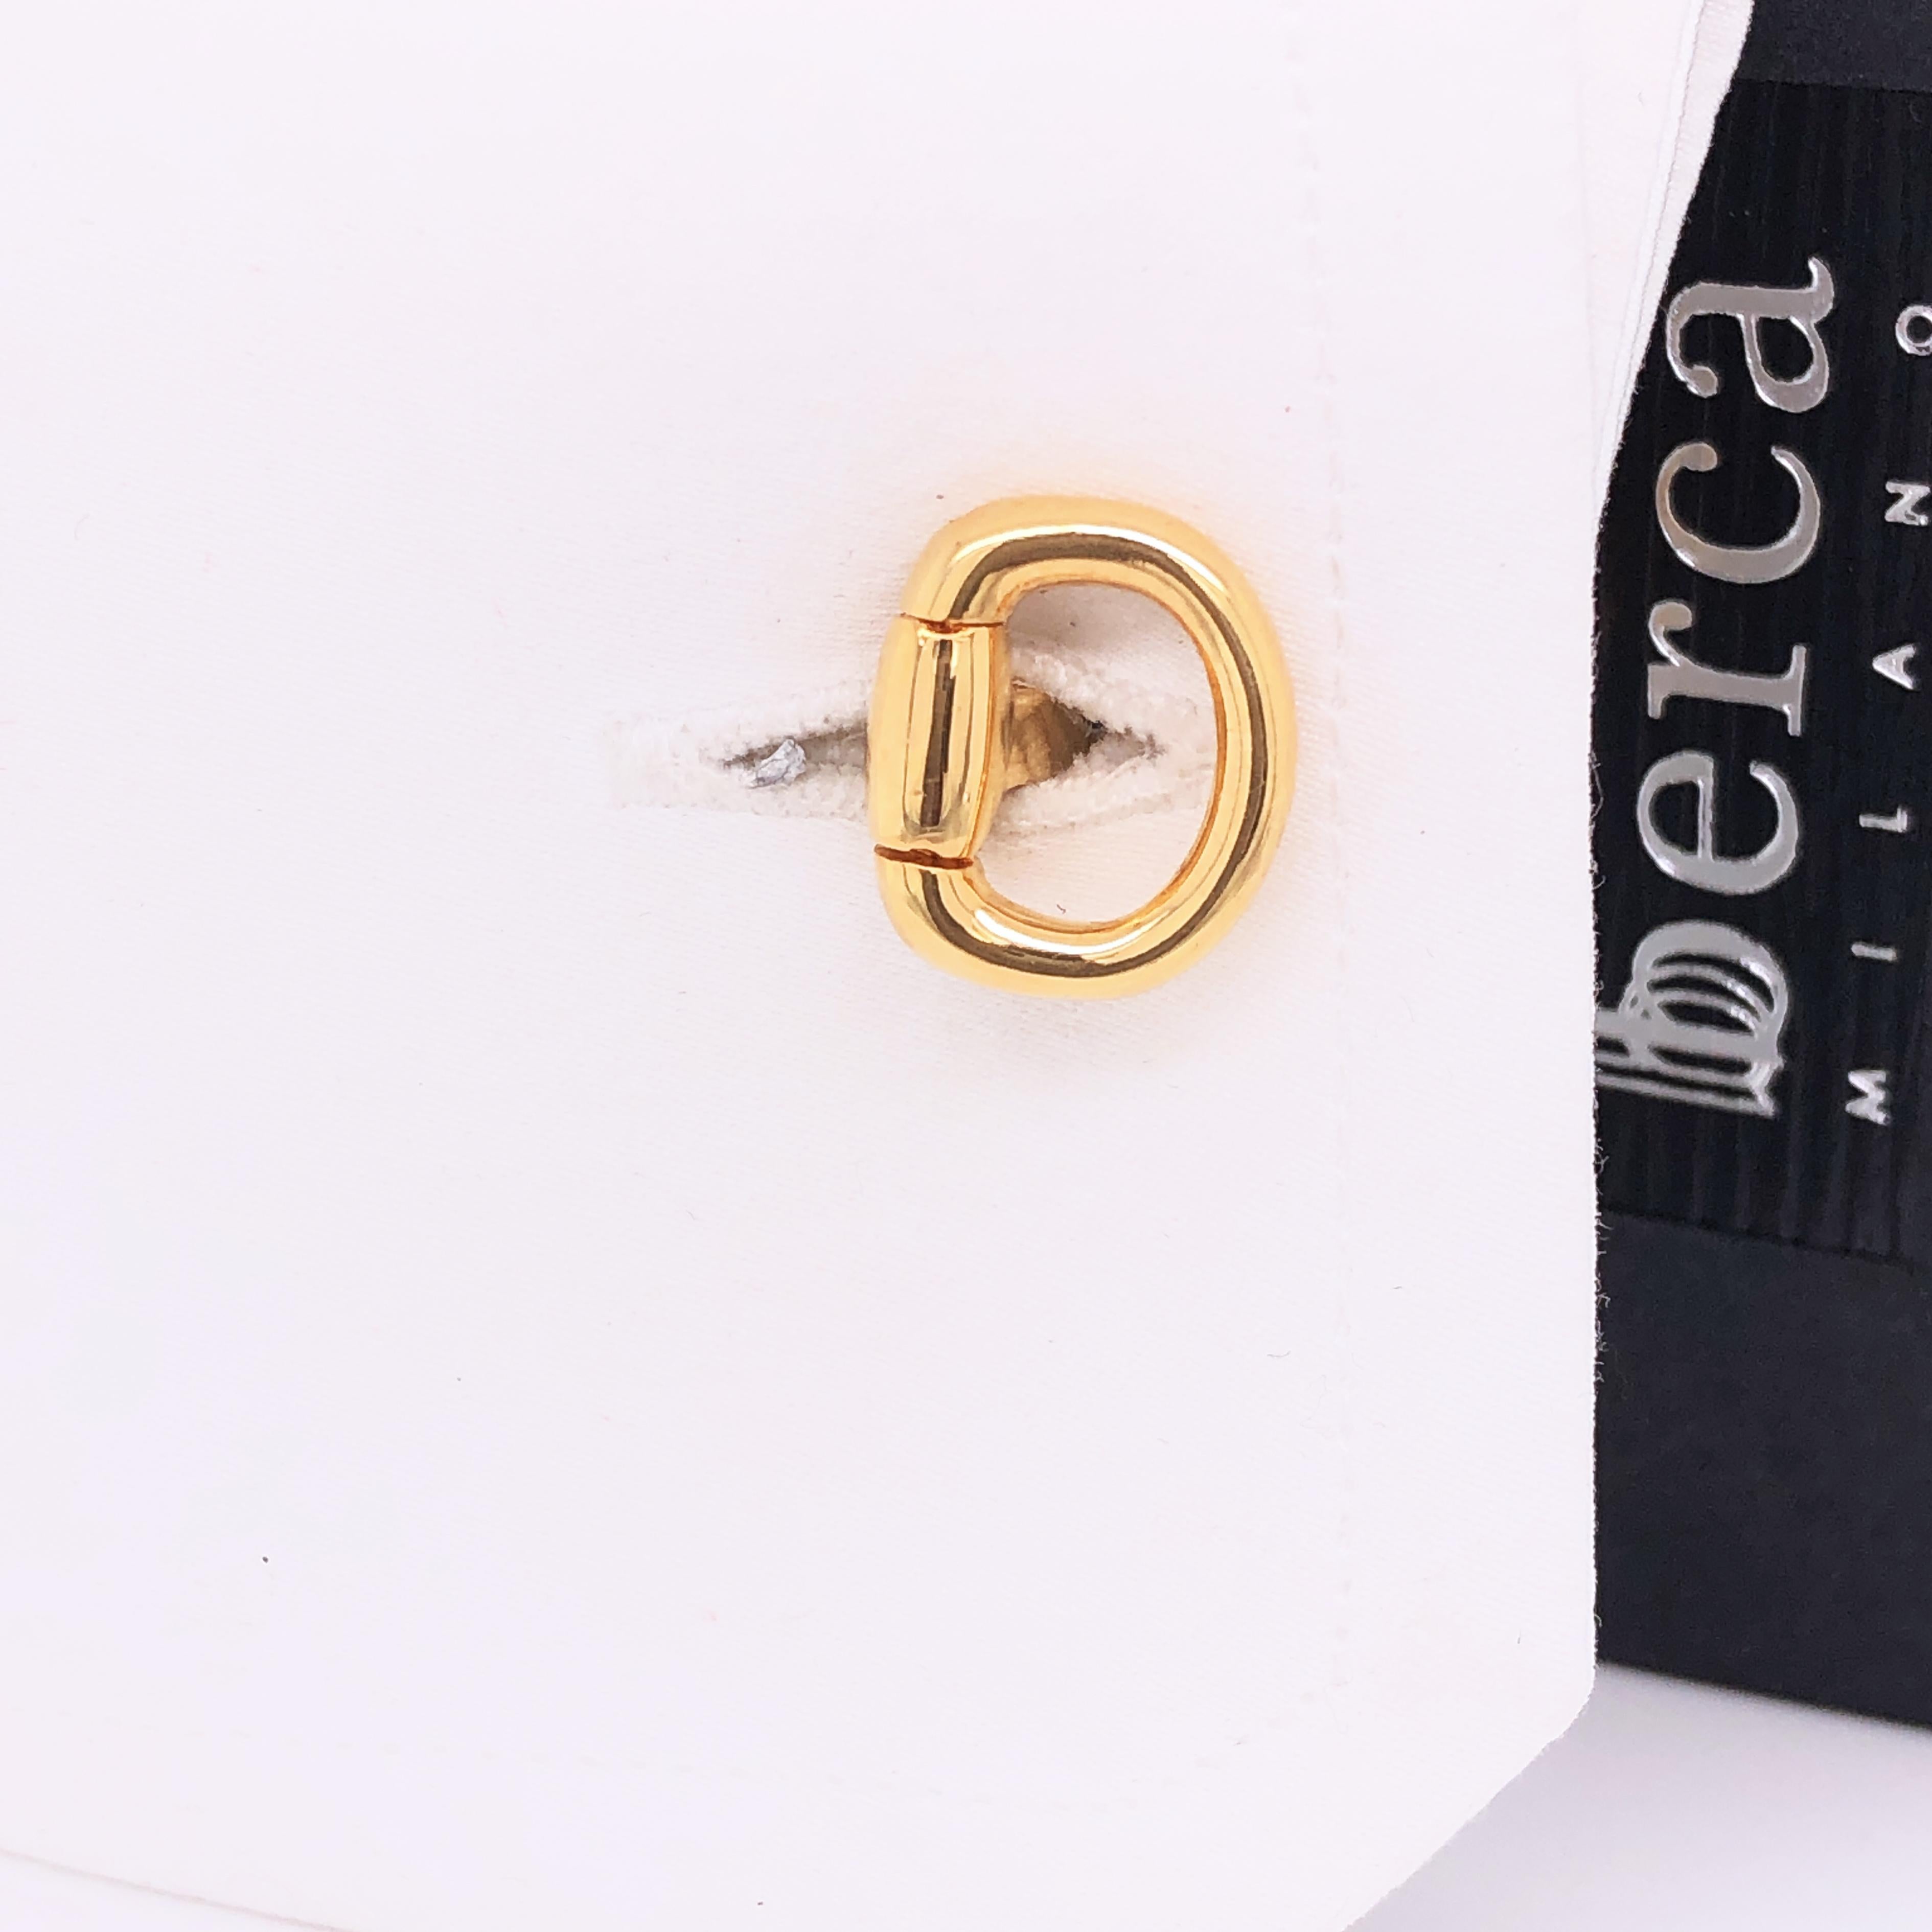 Berca Gold-Plated Solid Sterling Silver Stirrup Shaped Cufflinks 1